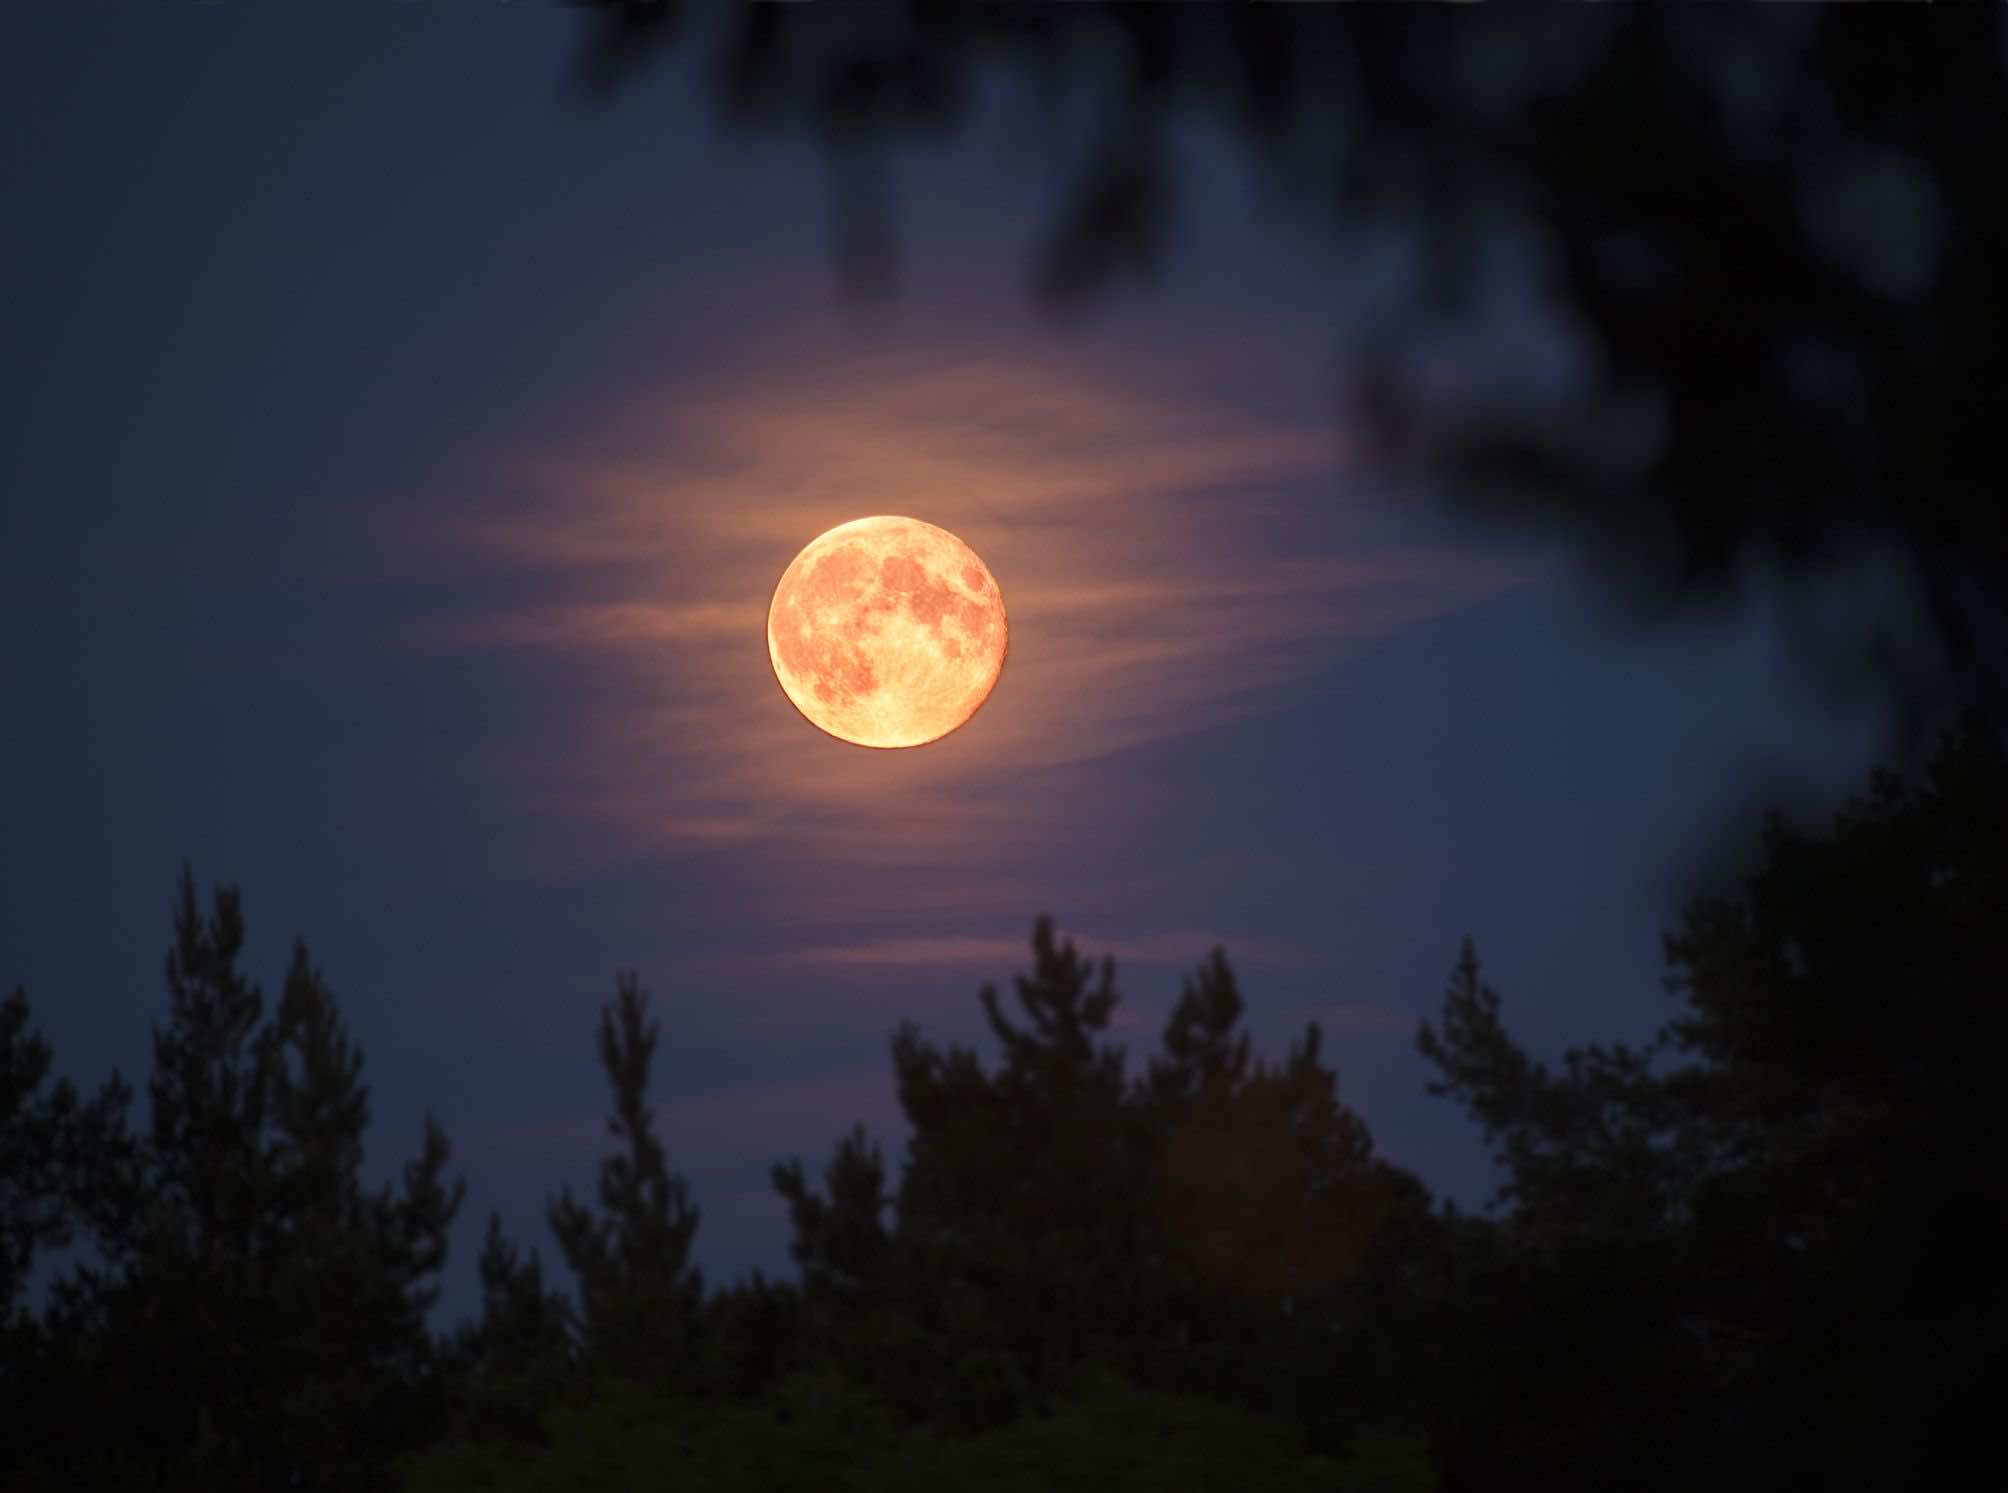 April’s ‘pink’ supermoon will be the biggest and brightest of 2020